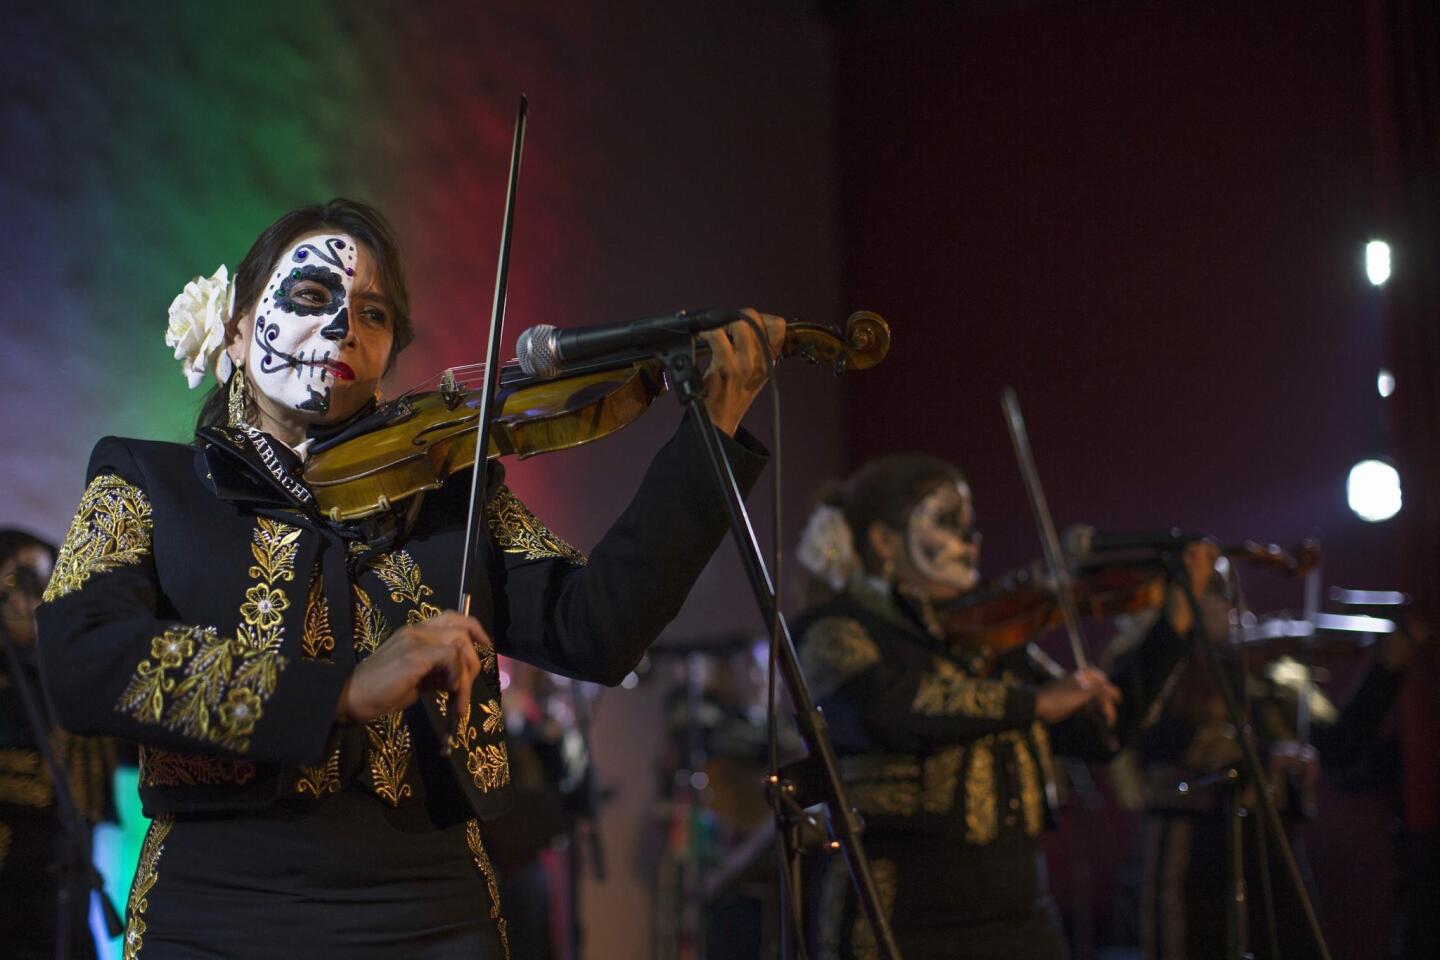 The Mariachi Divas de Cindy Shea perform at a press reception ahead of the 15th annual Day of the Dead festival at Hollywood Forever Cemetery in Los Angeles